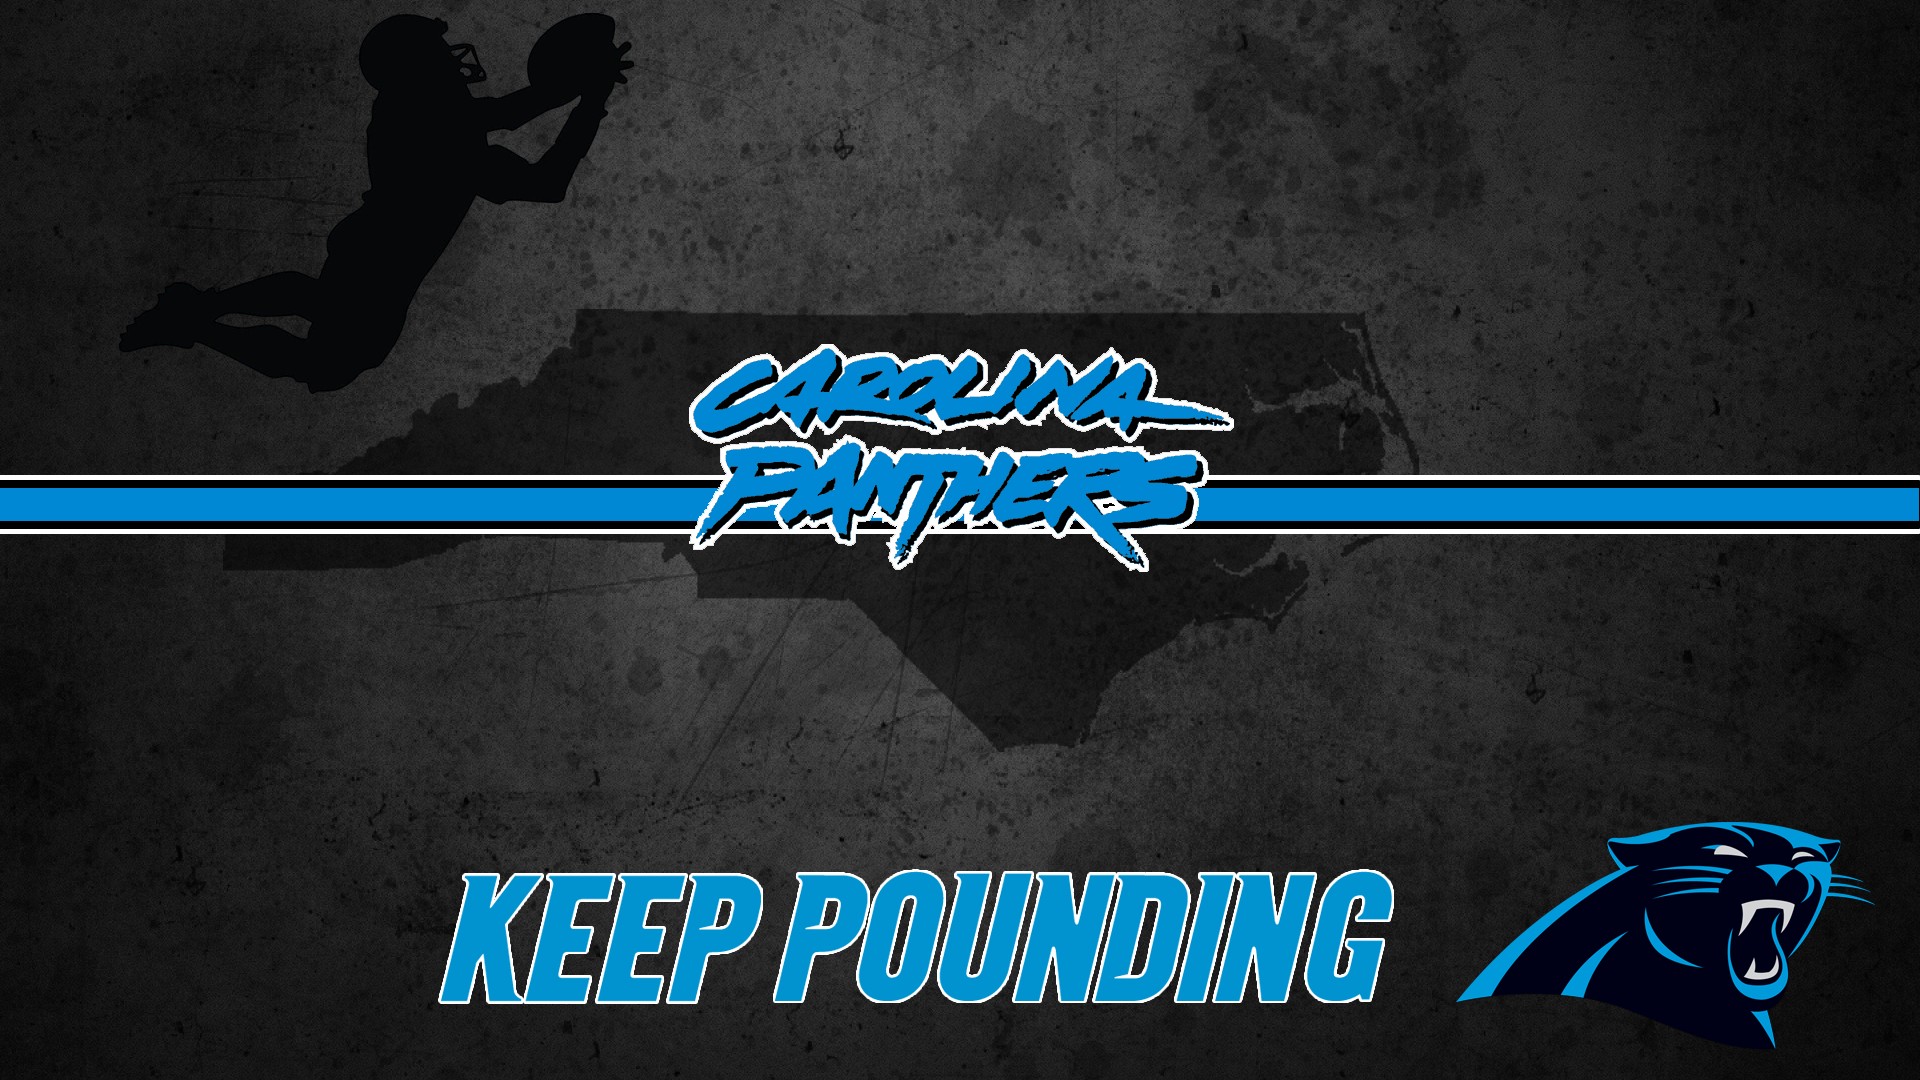 HD Backgrounds Carolina Panthers With Resolution 1920X1080